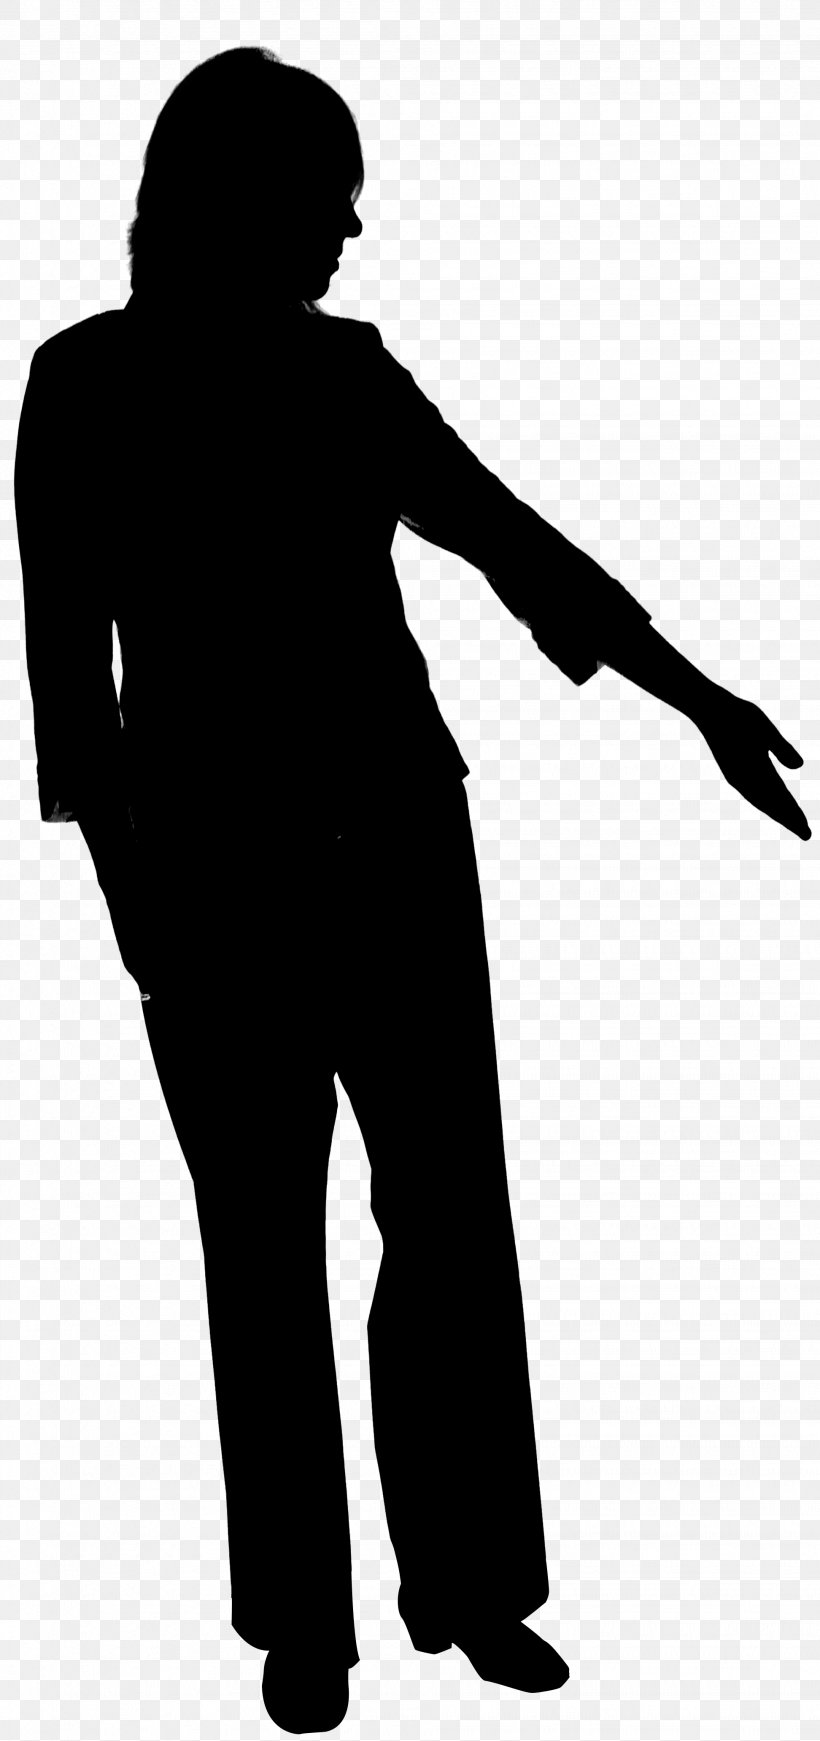 Human Behavior Silhouette Clip Art, PNG, 1944x4128px, Human, Behavior, Black M, Blackandwhite, Human Behavior Download Free